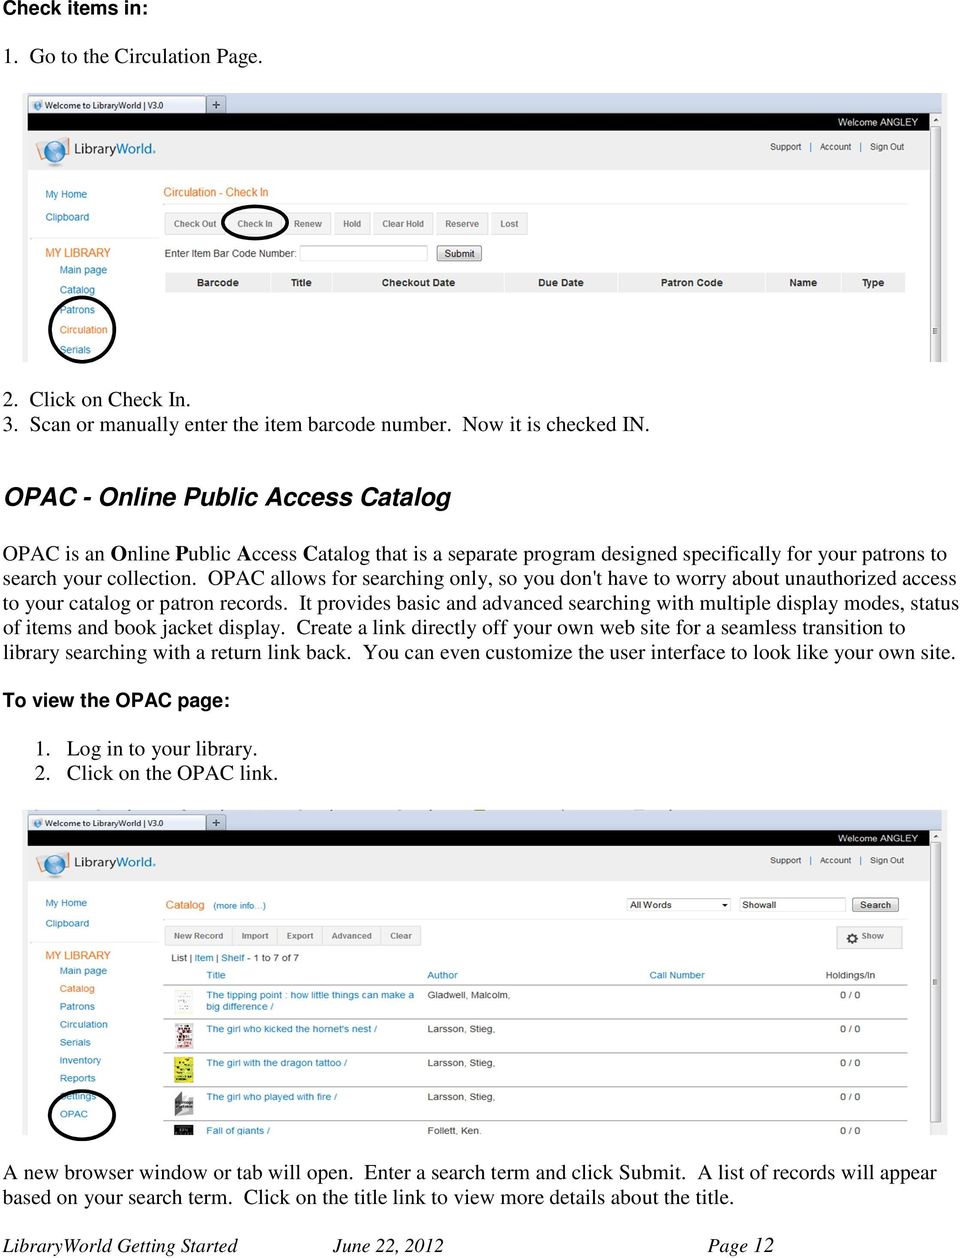 OPAC allows for searching only, so you don't have to worry about unauthorized access to your catalog or patron records.